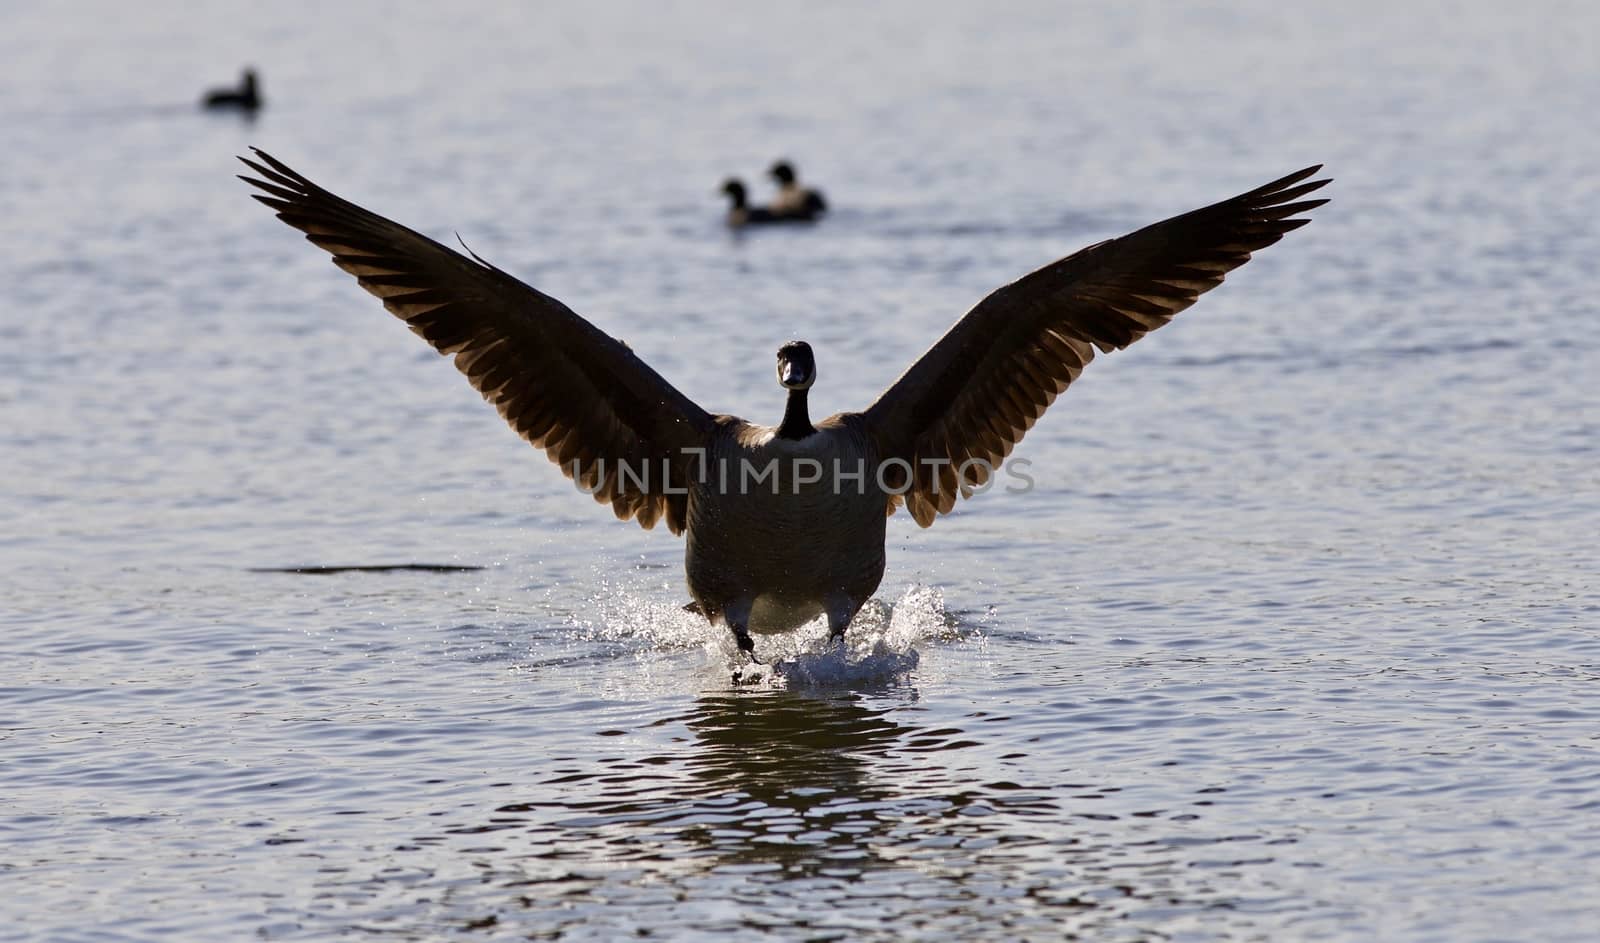 Beautiful isolated photo of a landing Canada goose